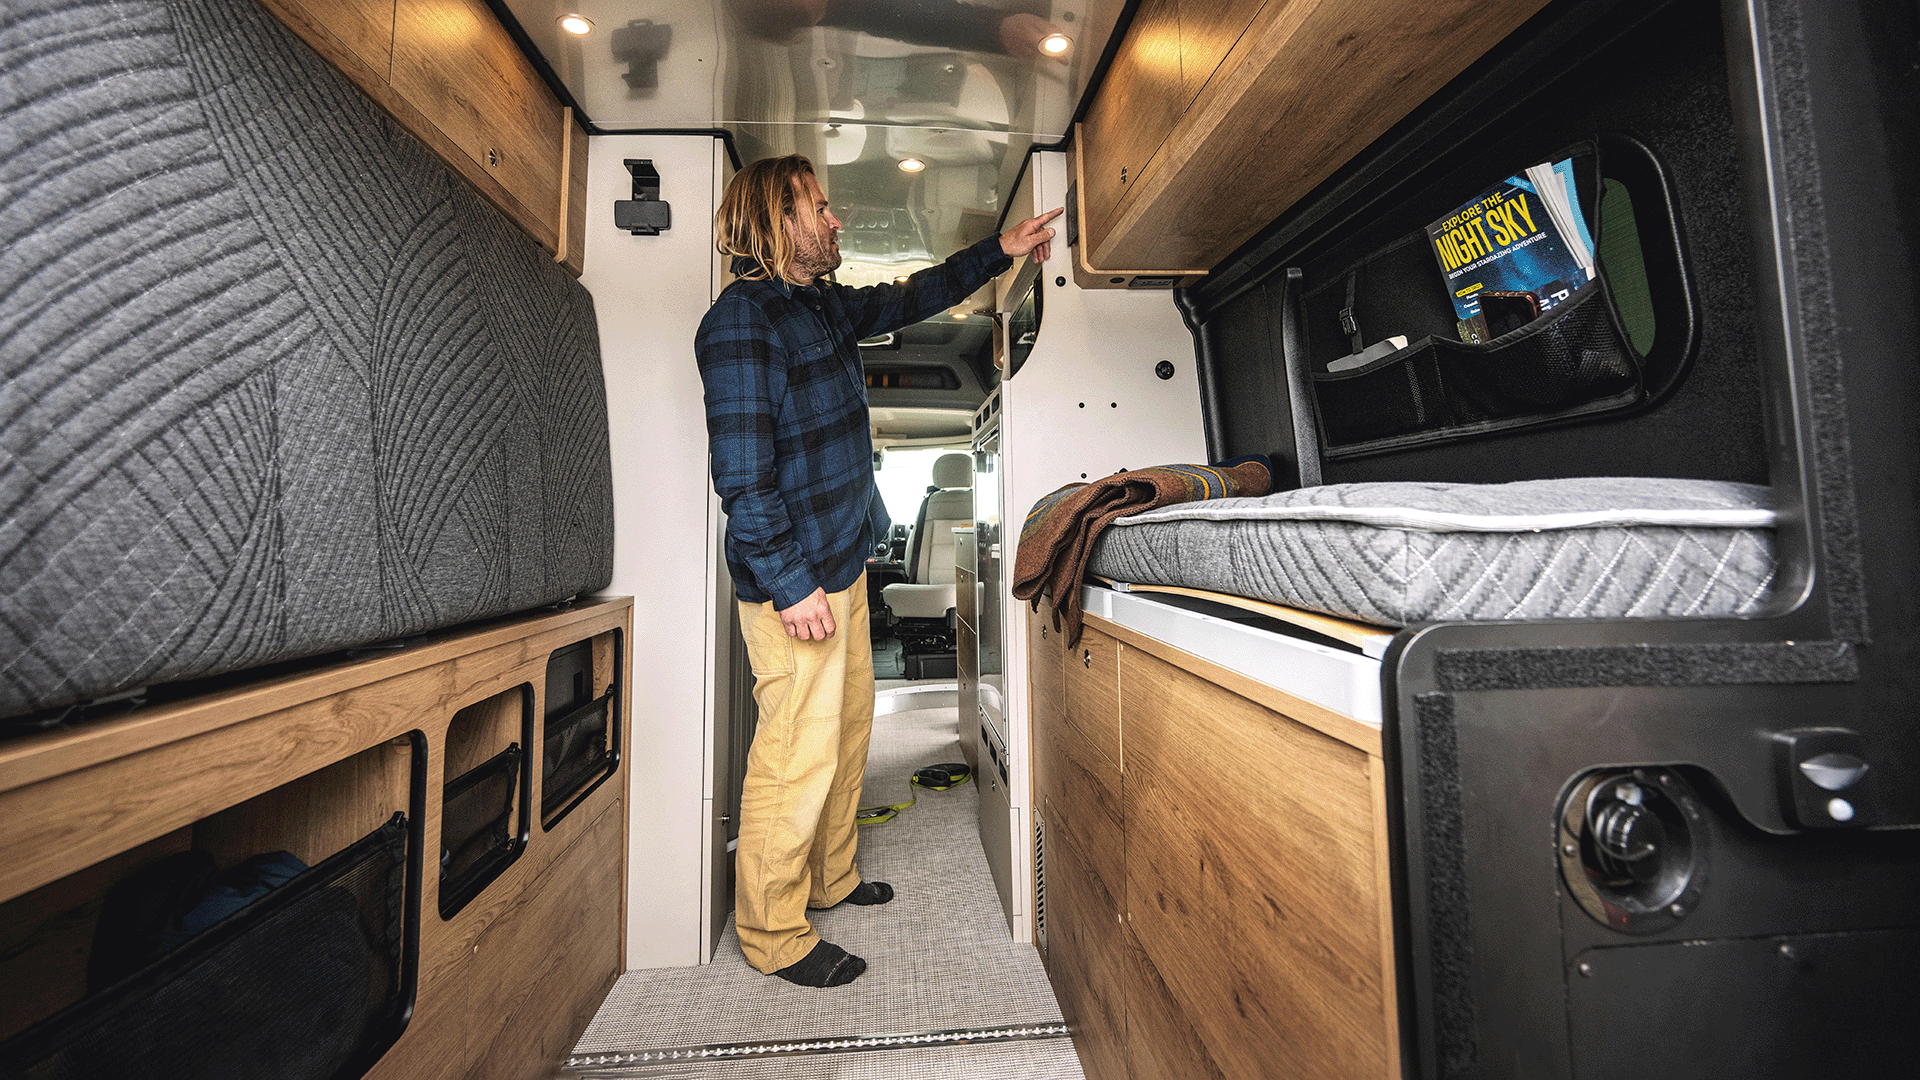 7 Game-Changing Features of the Airstream Rangeline Touring Coach